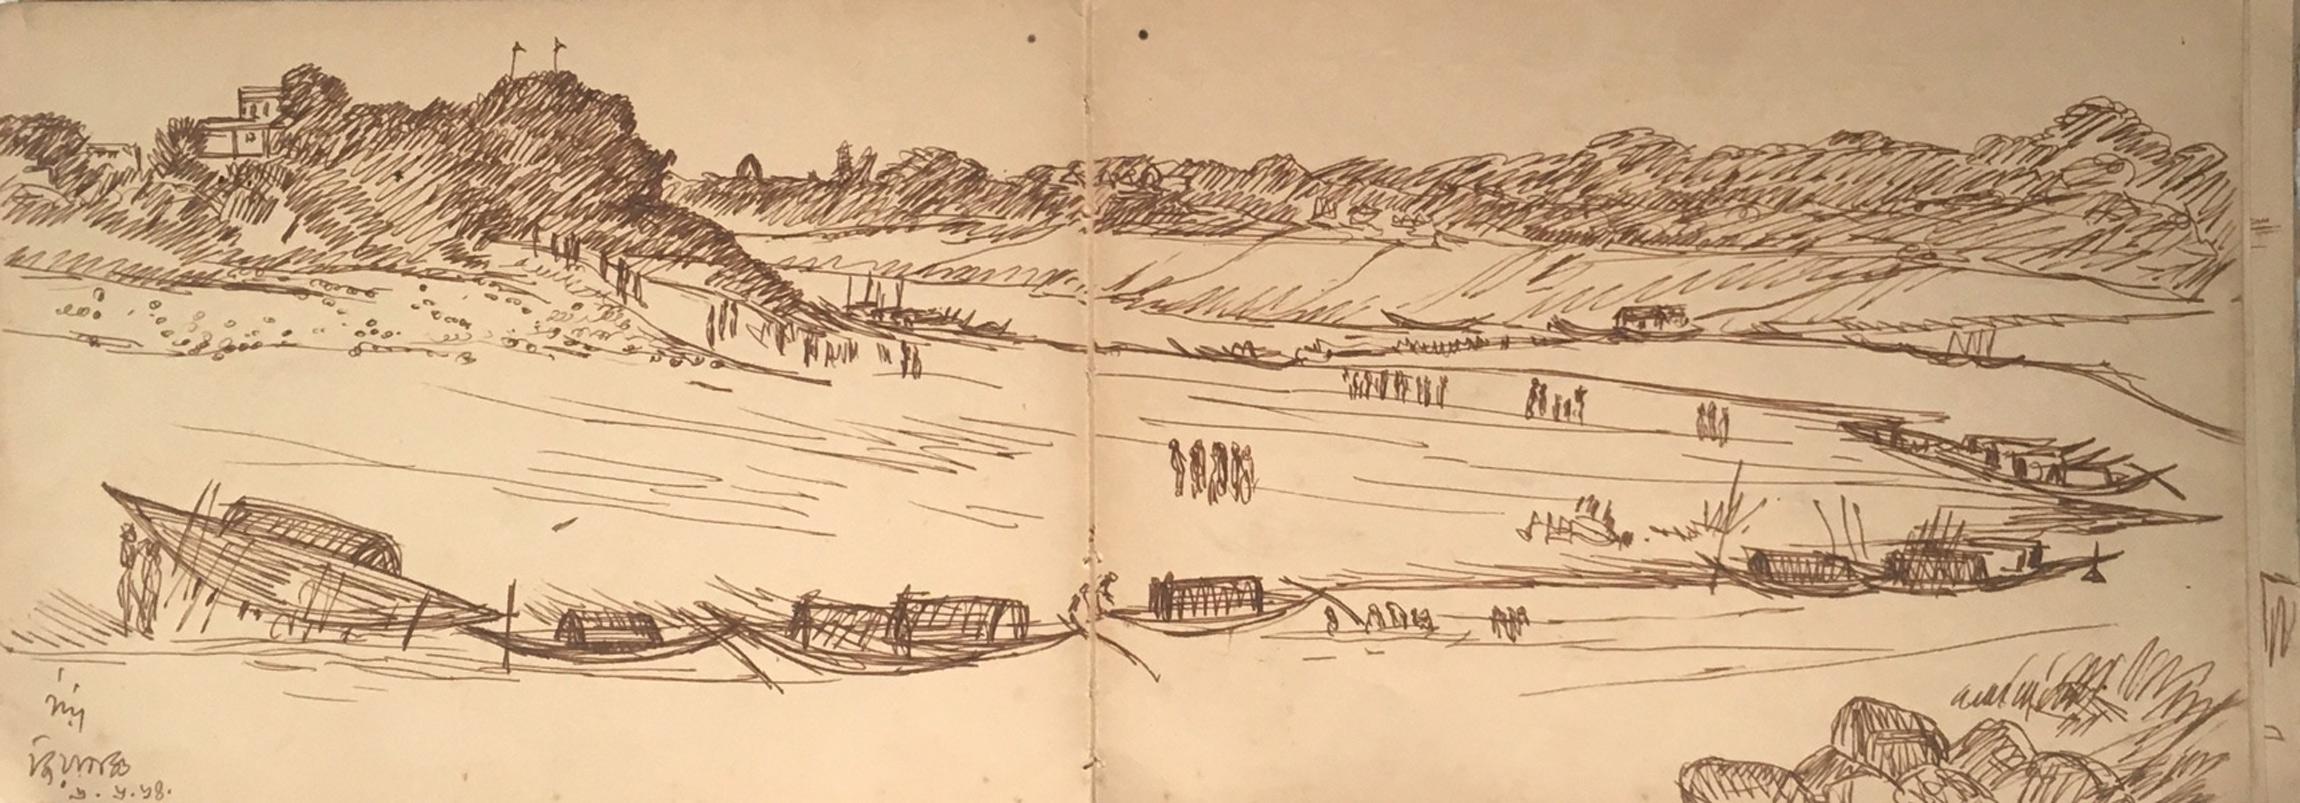 Jiyagunj : Boat, Rare Drawings, Ink on Paper by Indian Master Artist Indra Dugar